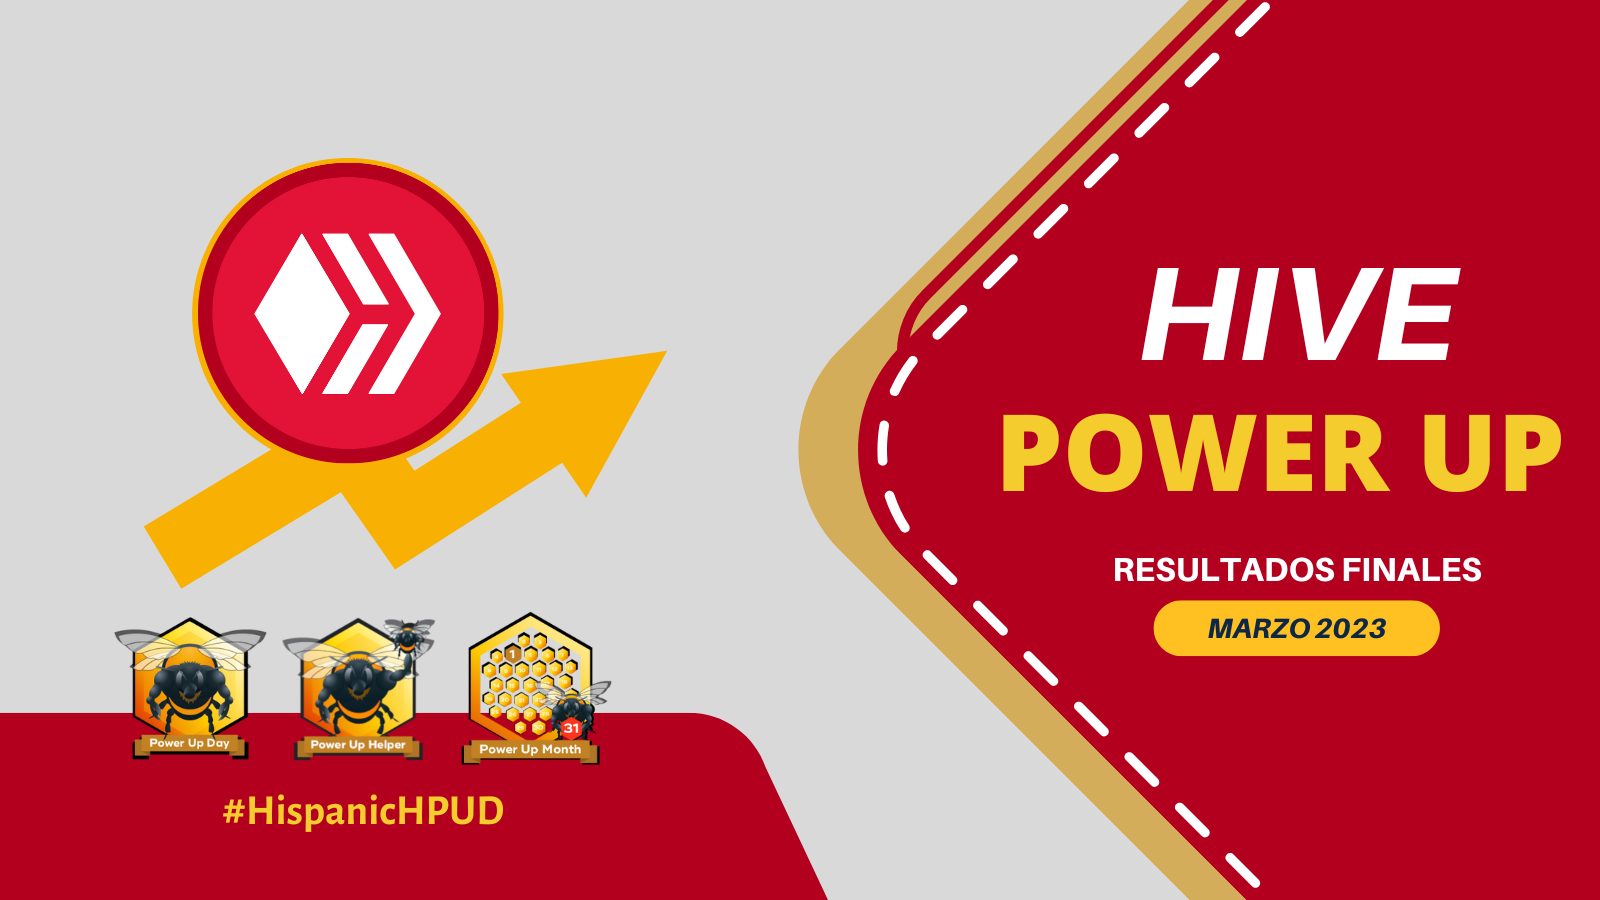 @victoriabsb/hive-power-up-day--final-results-hpud-marzo-2023-hispanic-winners